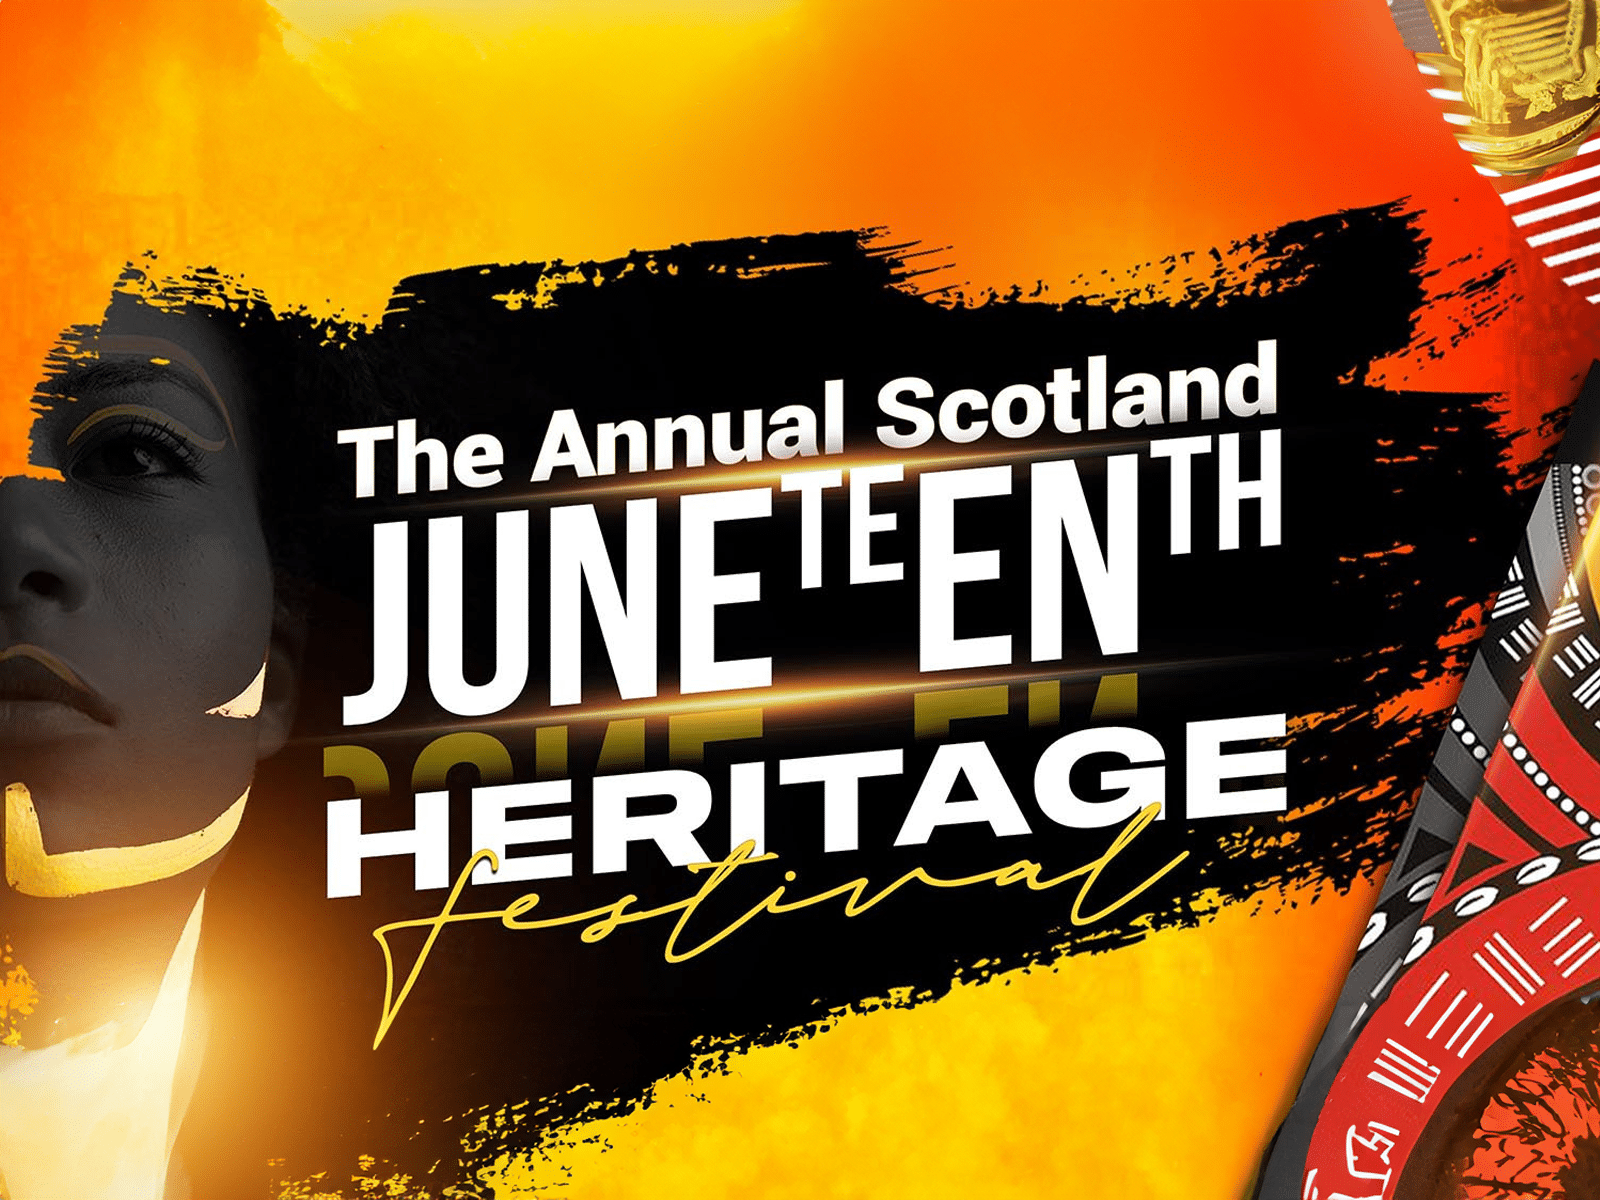 silhouette of a Black woman's face and African-themed designs. Text says The Annual Scotland Juneteenth Heritage Festival